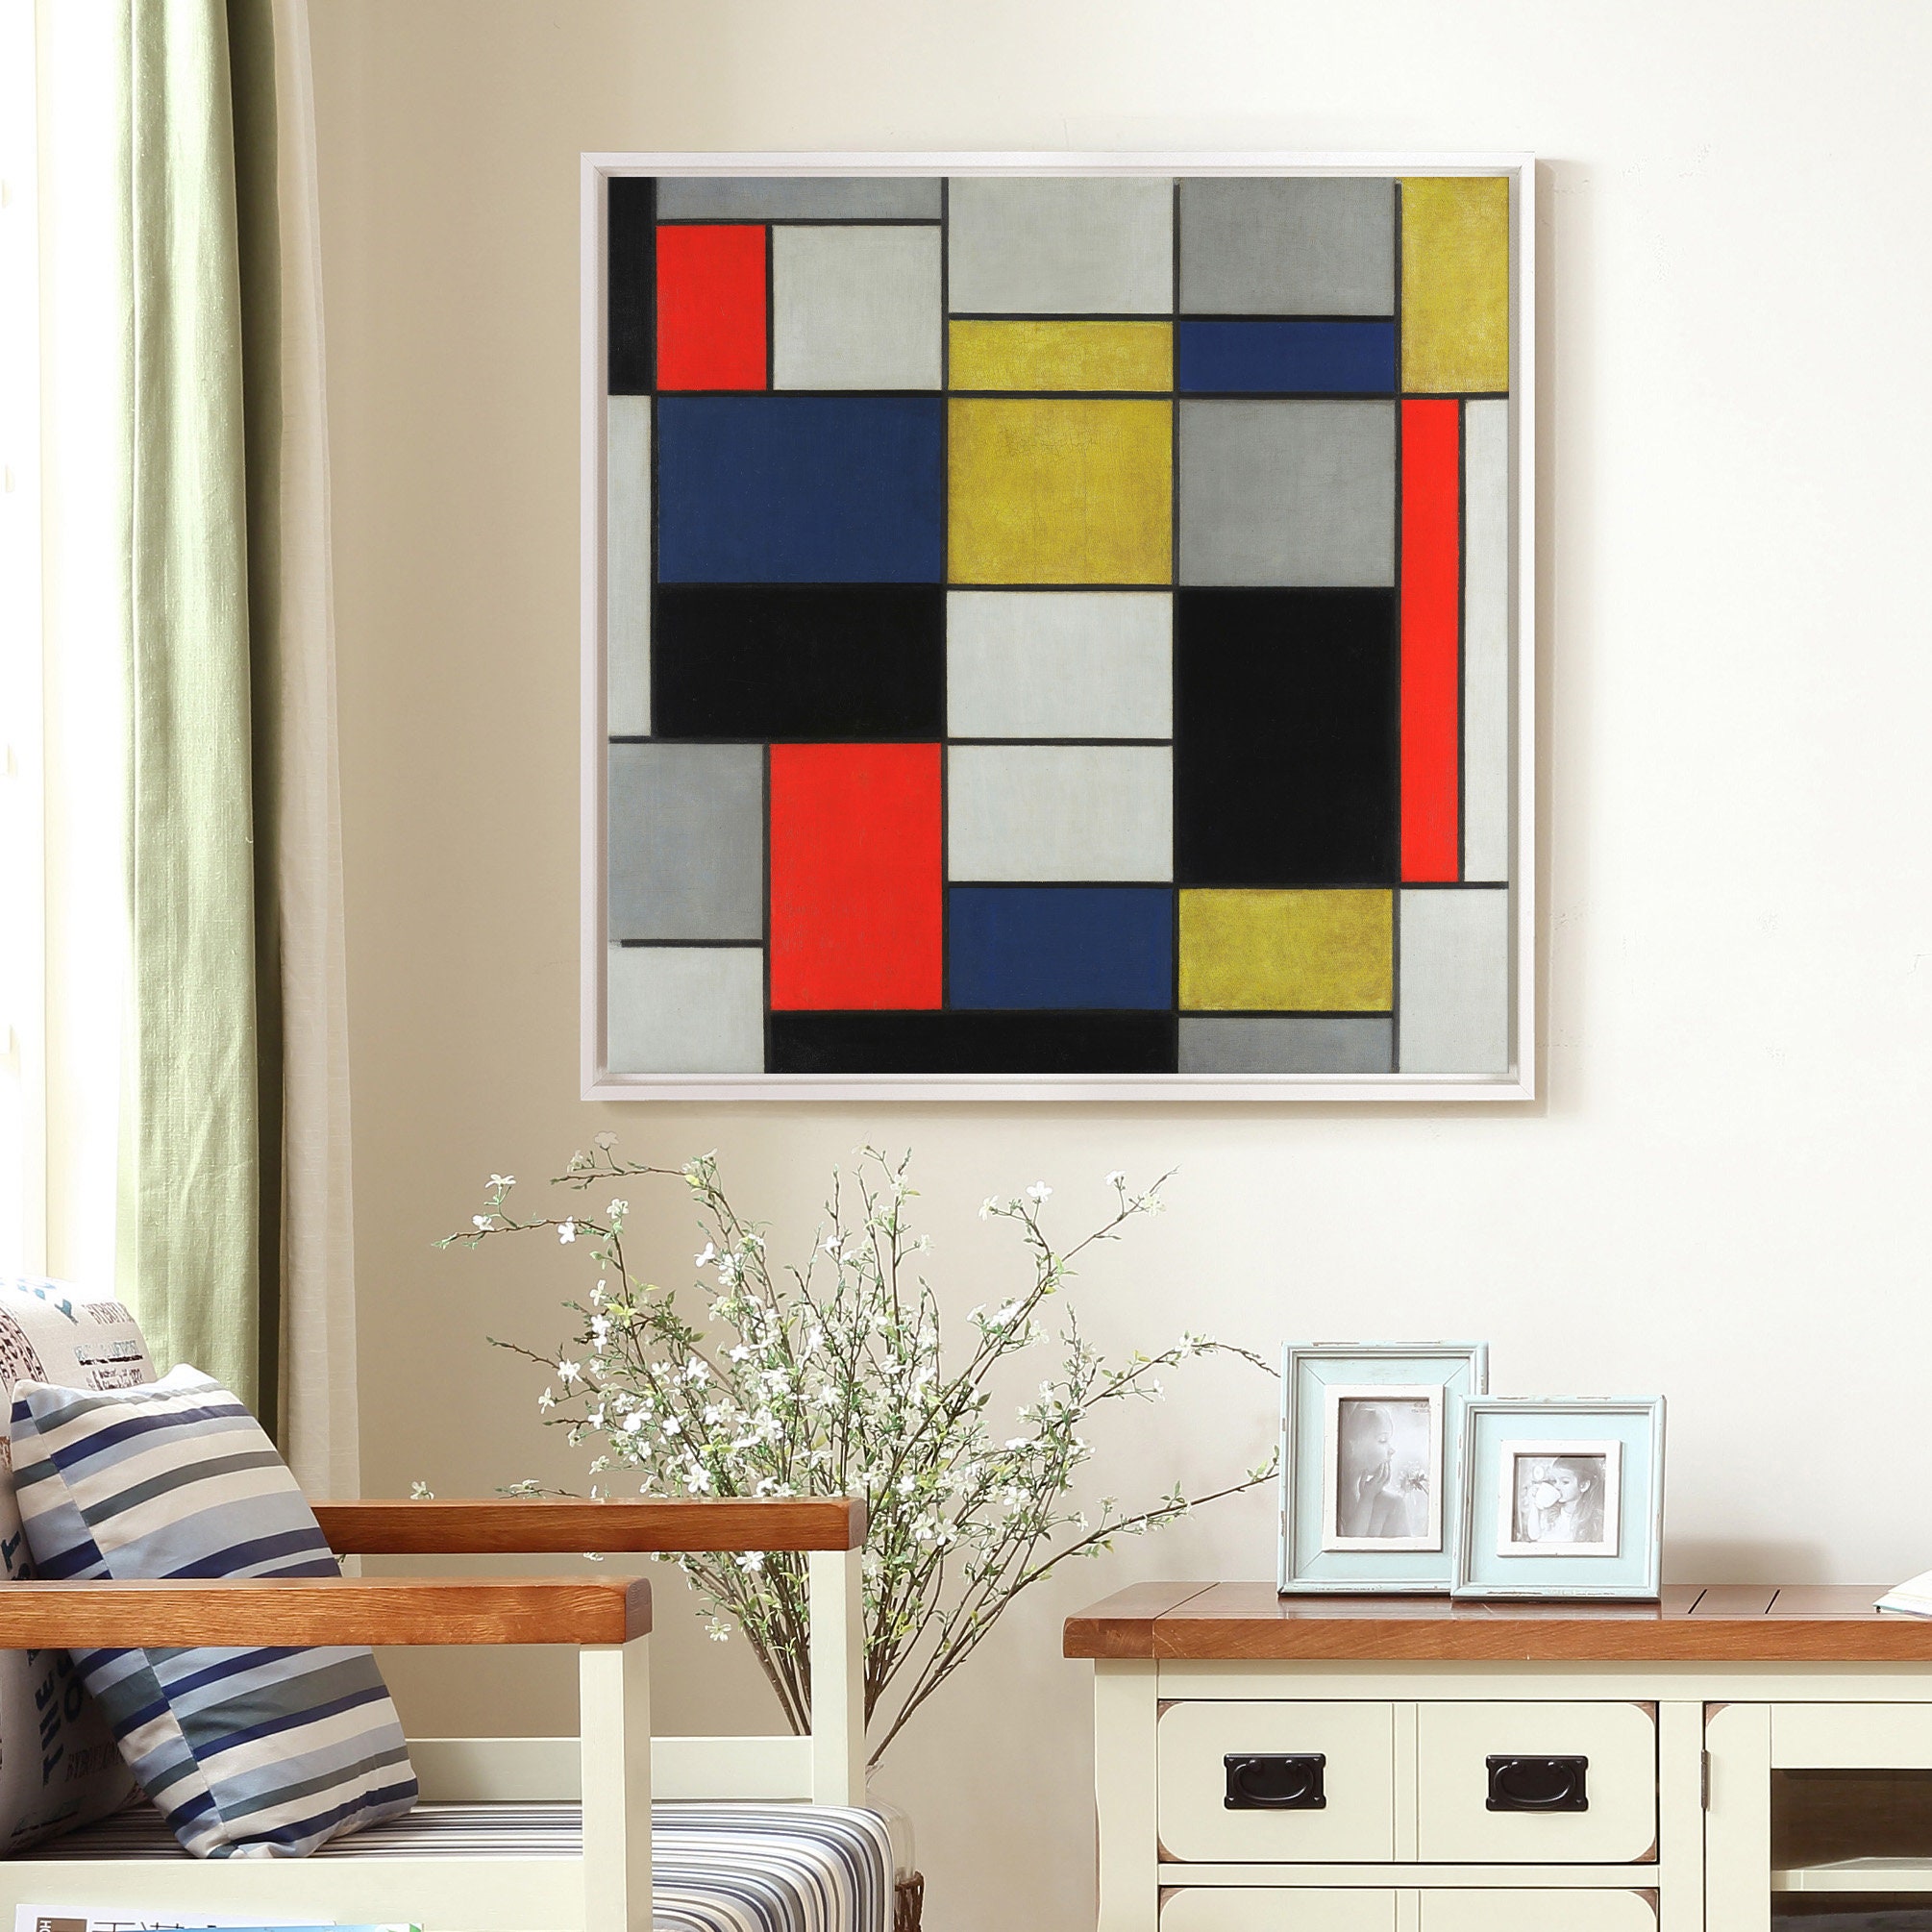 Piet Mondrian Large composition A with black red gray yellow | Etsy